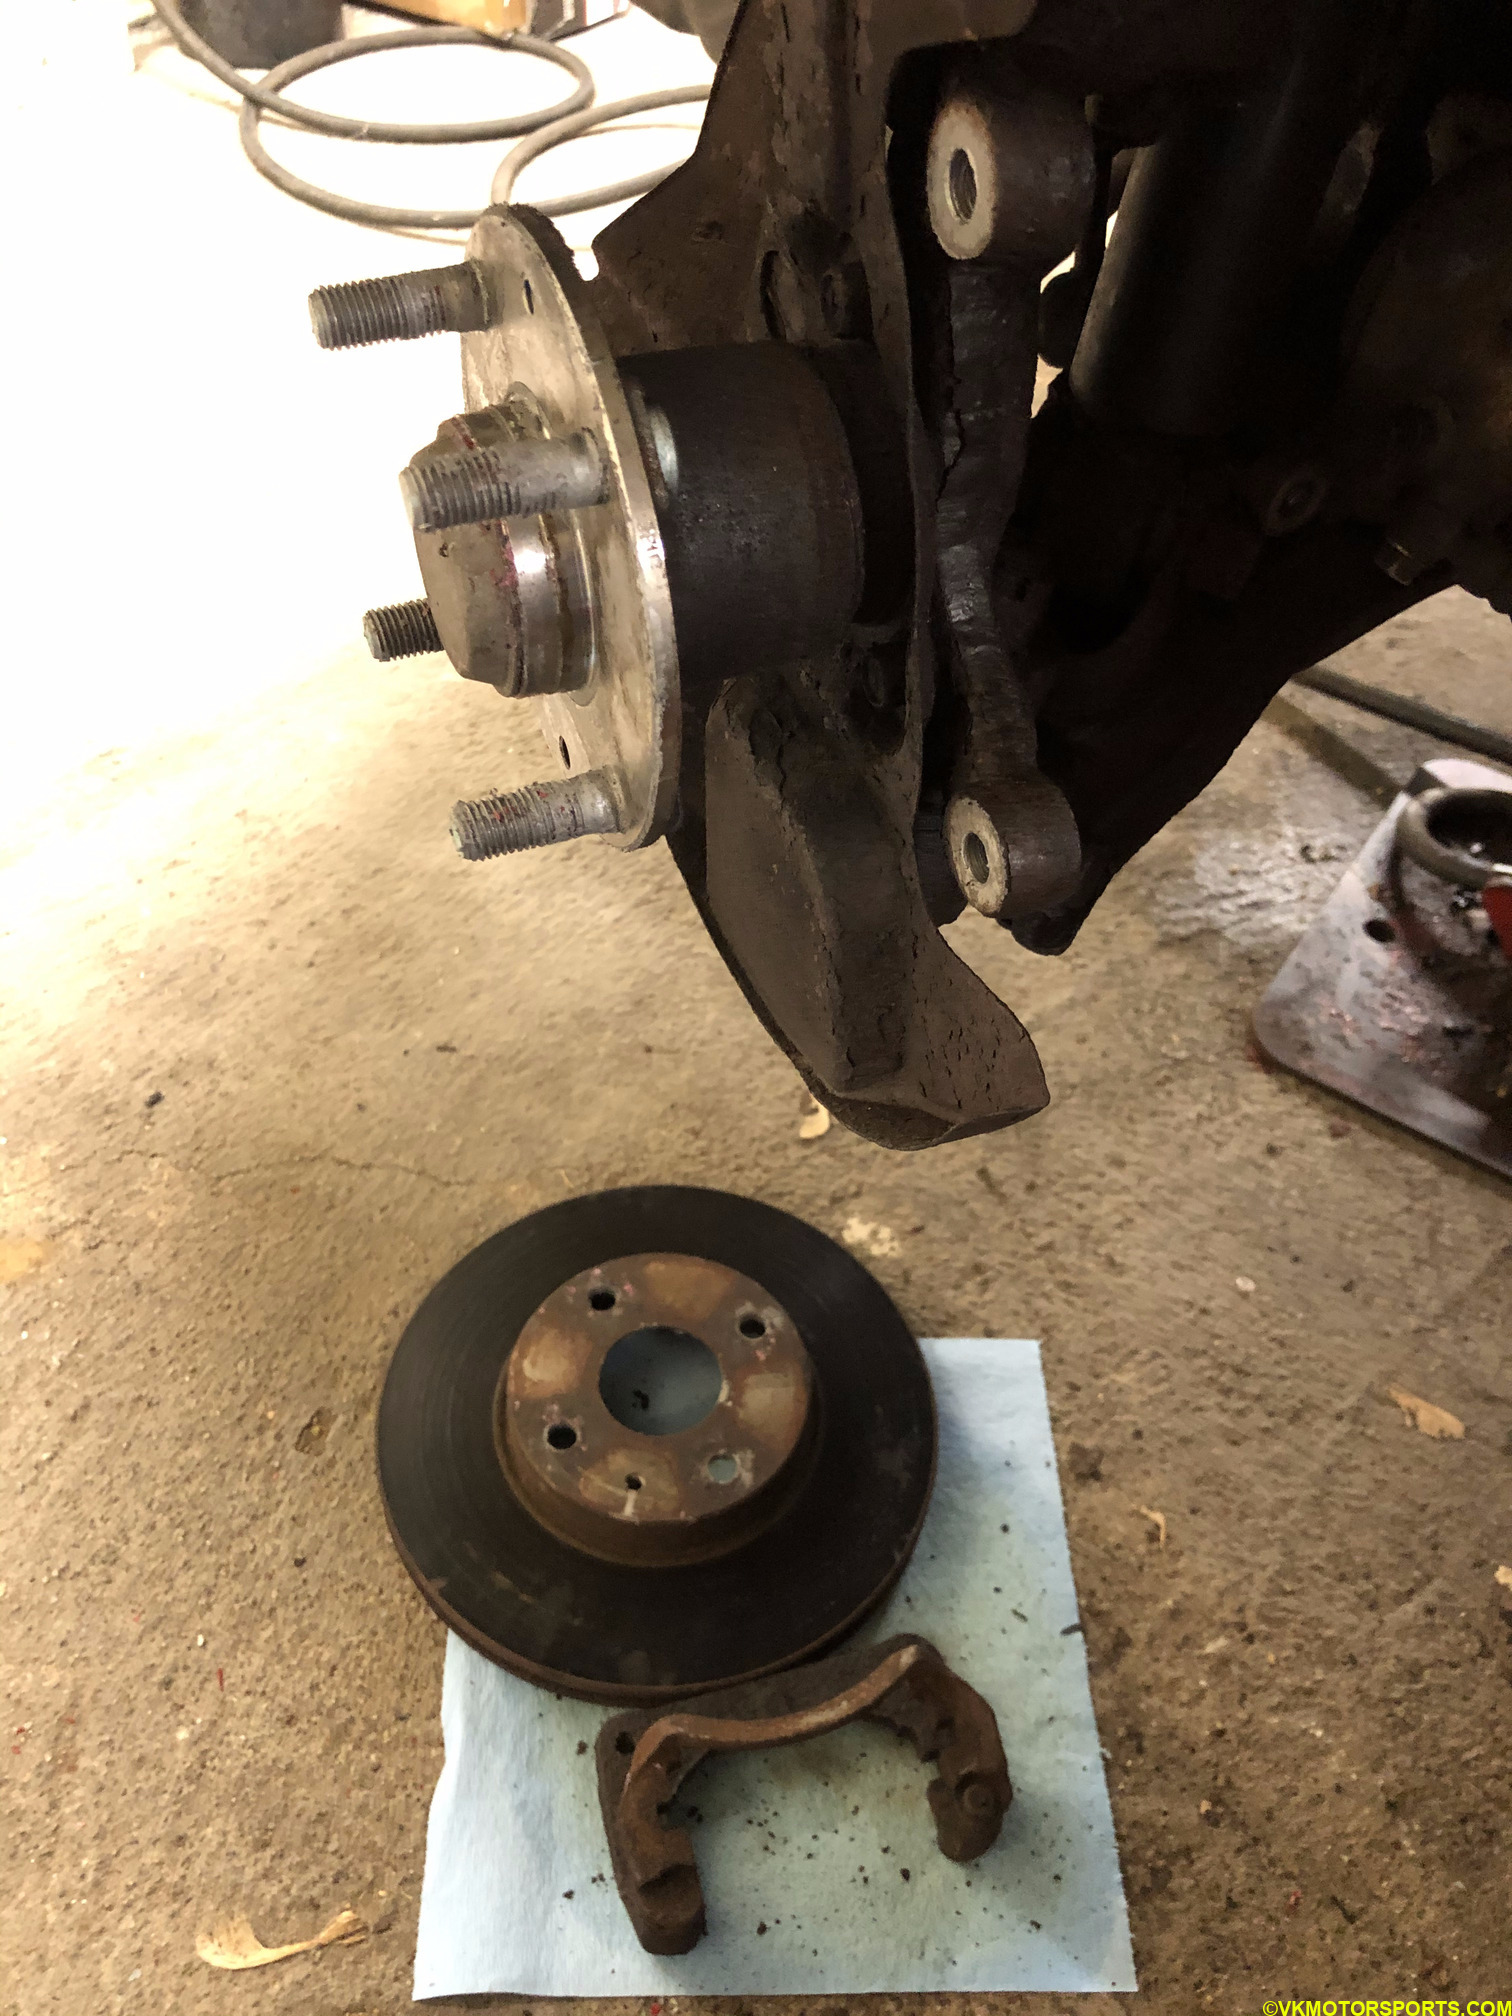 Rotor removed and wheel hub exposed on the driver side